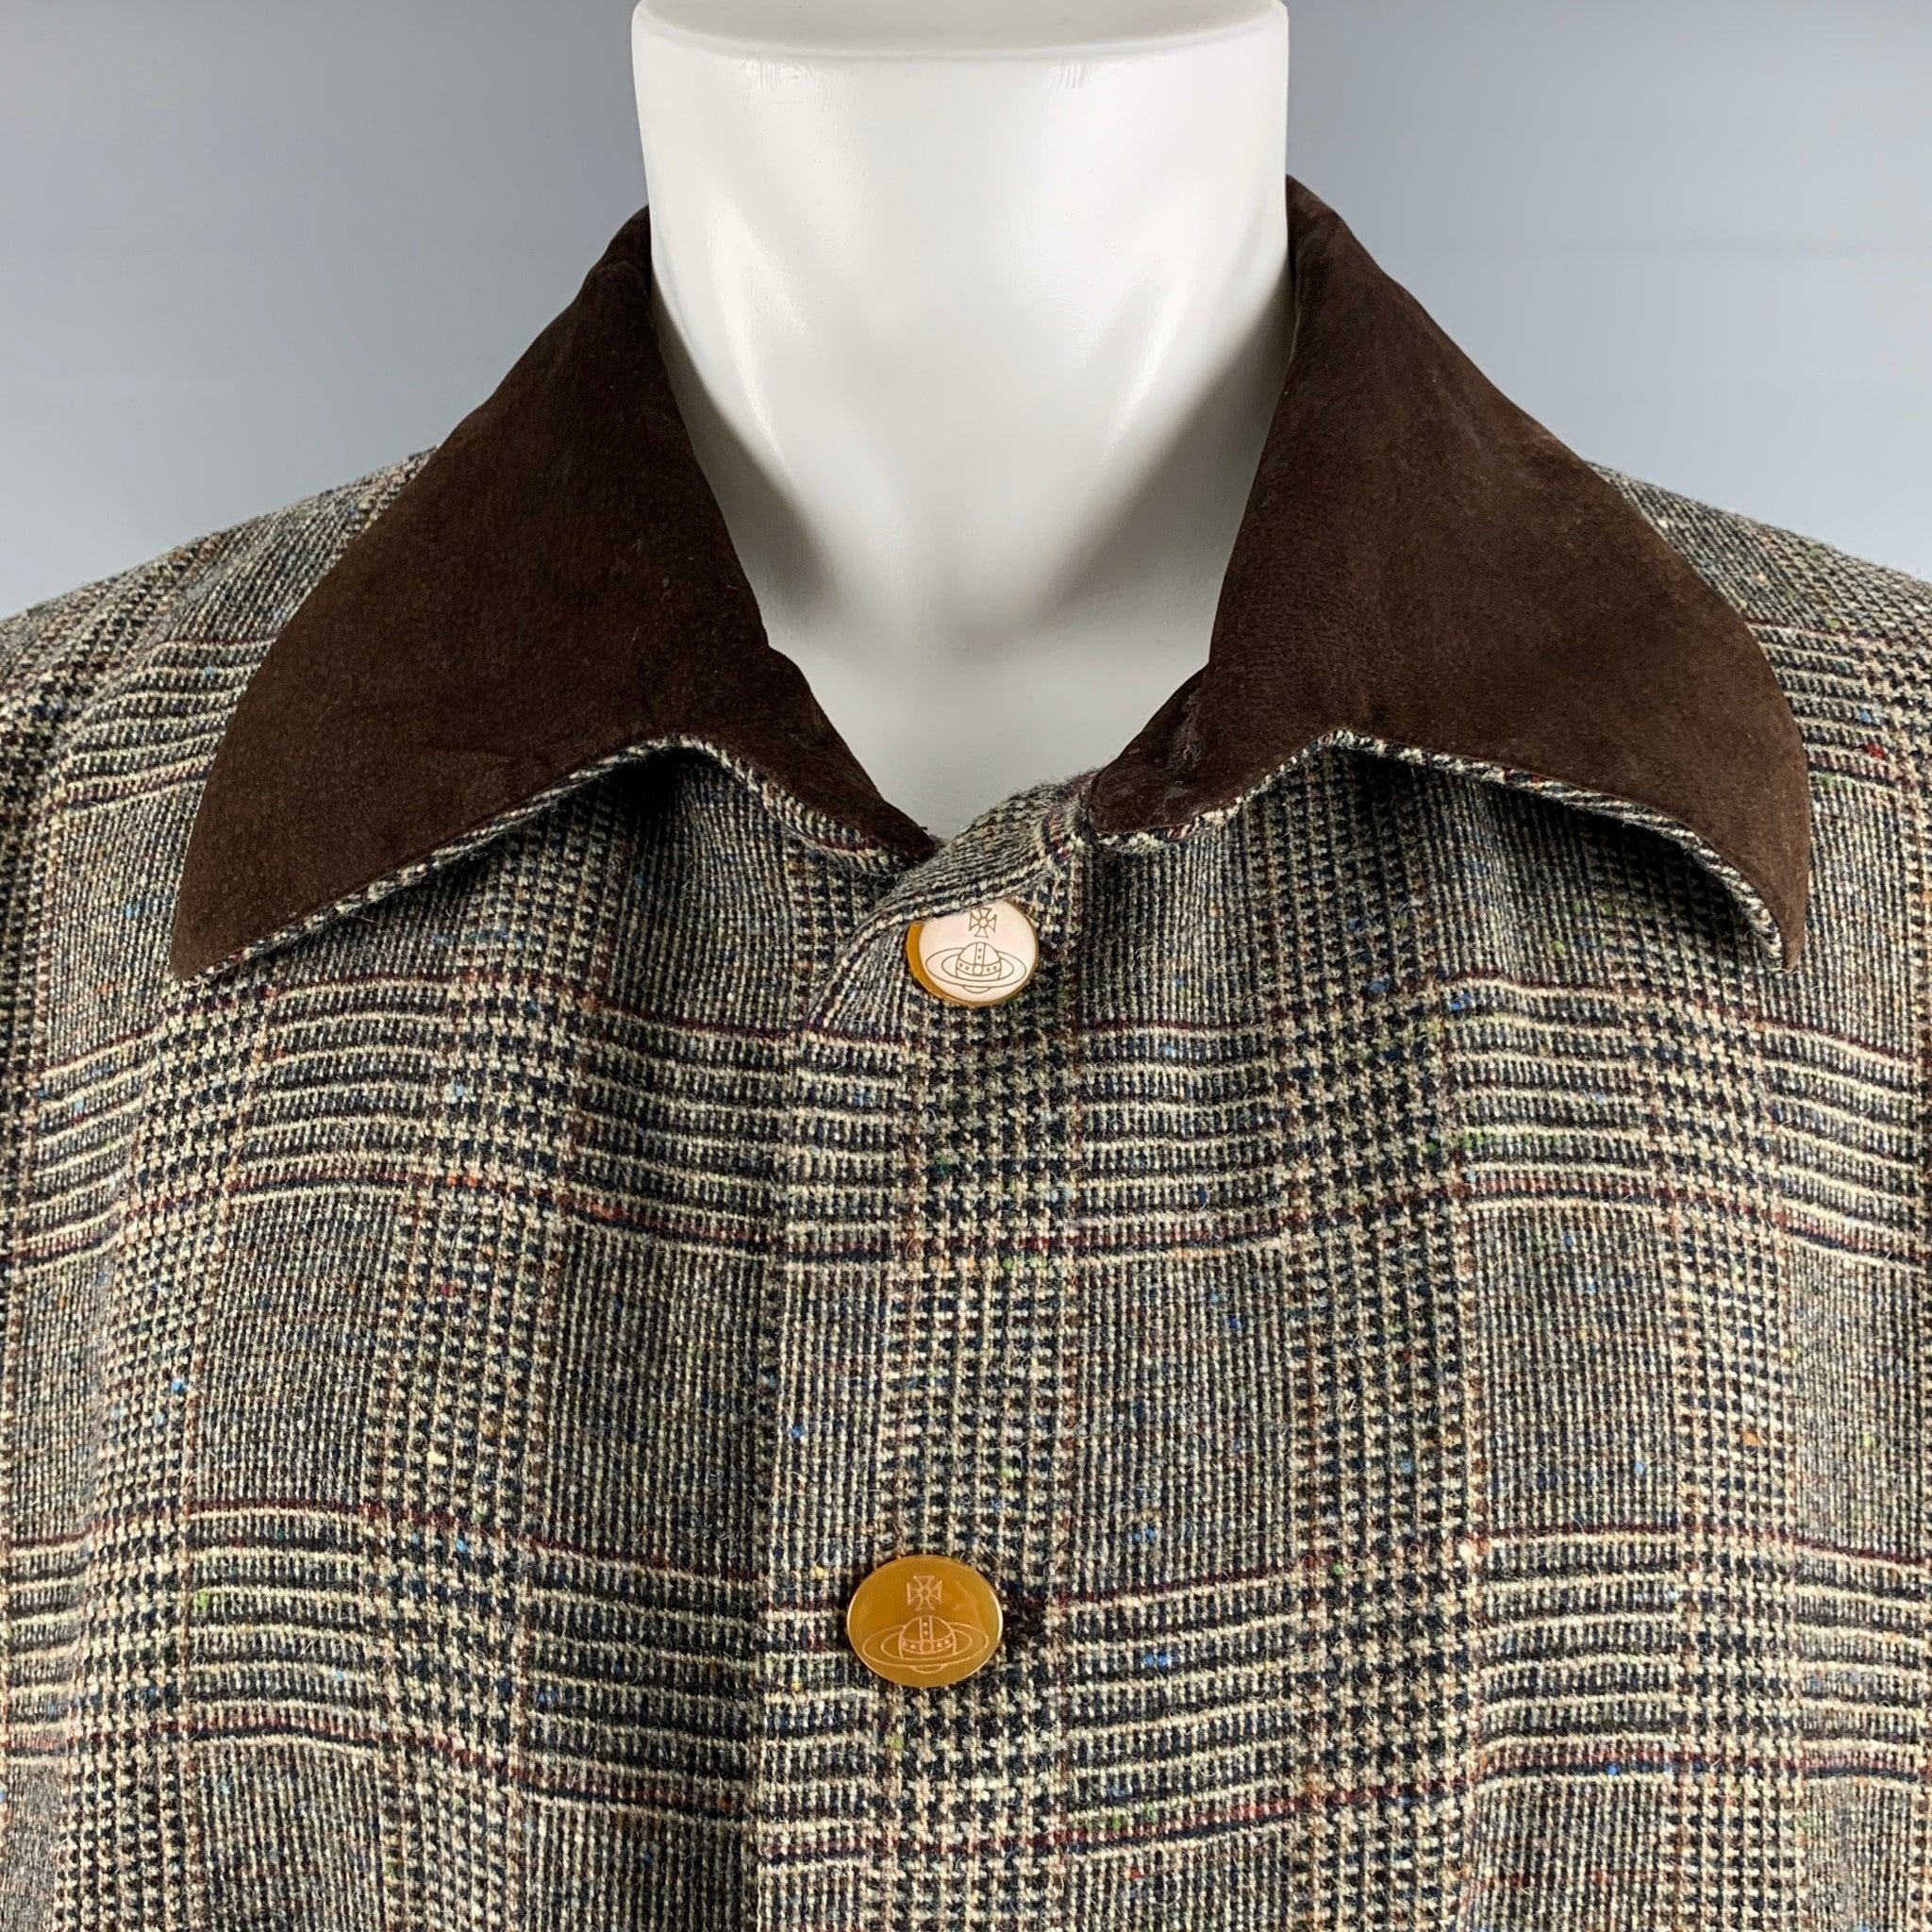 VIVIENNE WESTWOOD MAN coat comes in grey and black plaid lambs wool woven material featuring a vintage car coat style, drop shoulder, patch pockets, collar and hem suede details, and logo buttons closure. Made in Italy.Very Good Pre-Owned Condition.